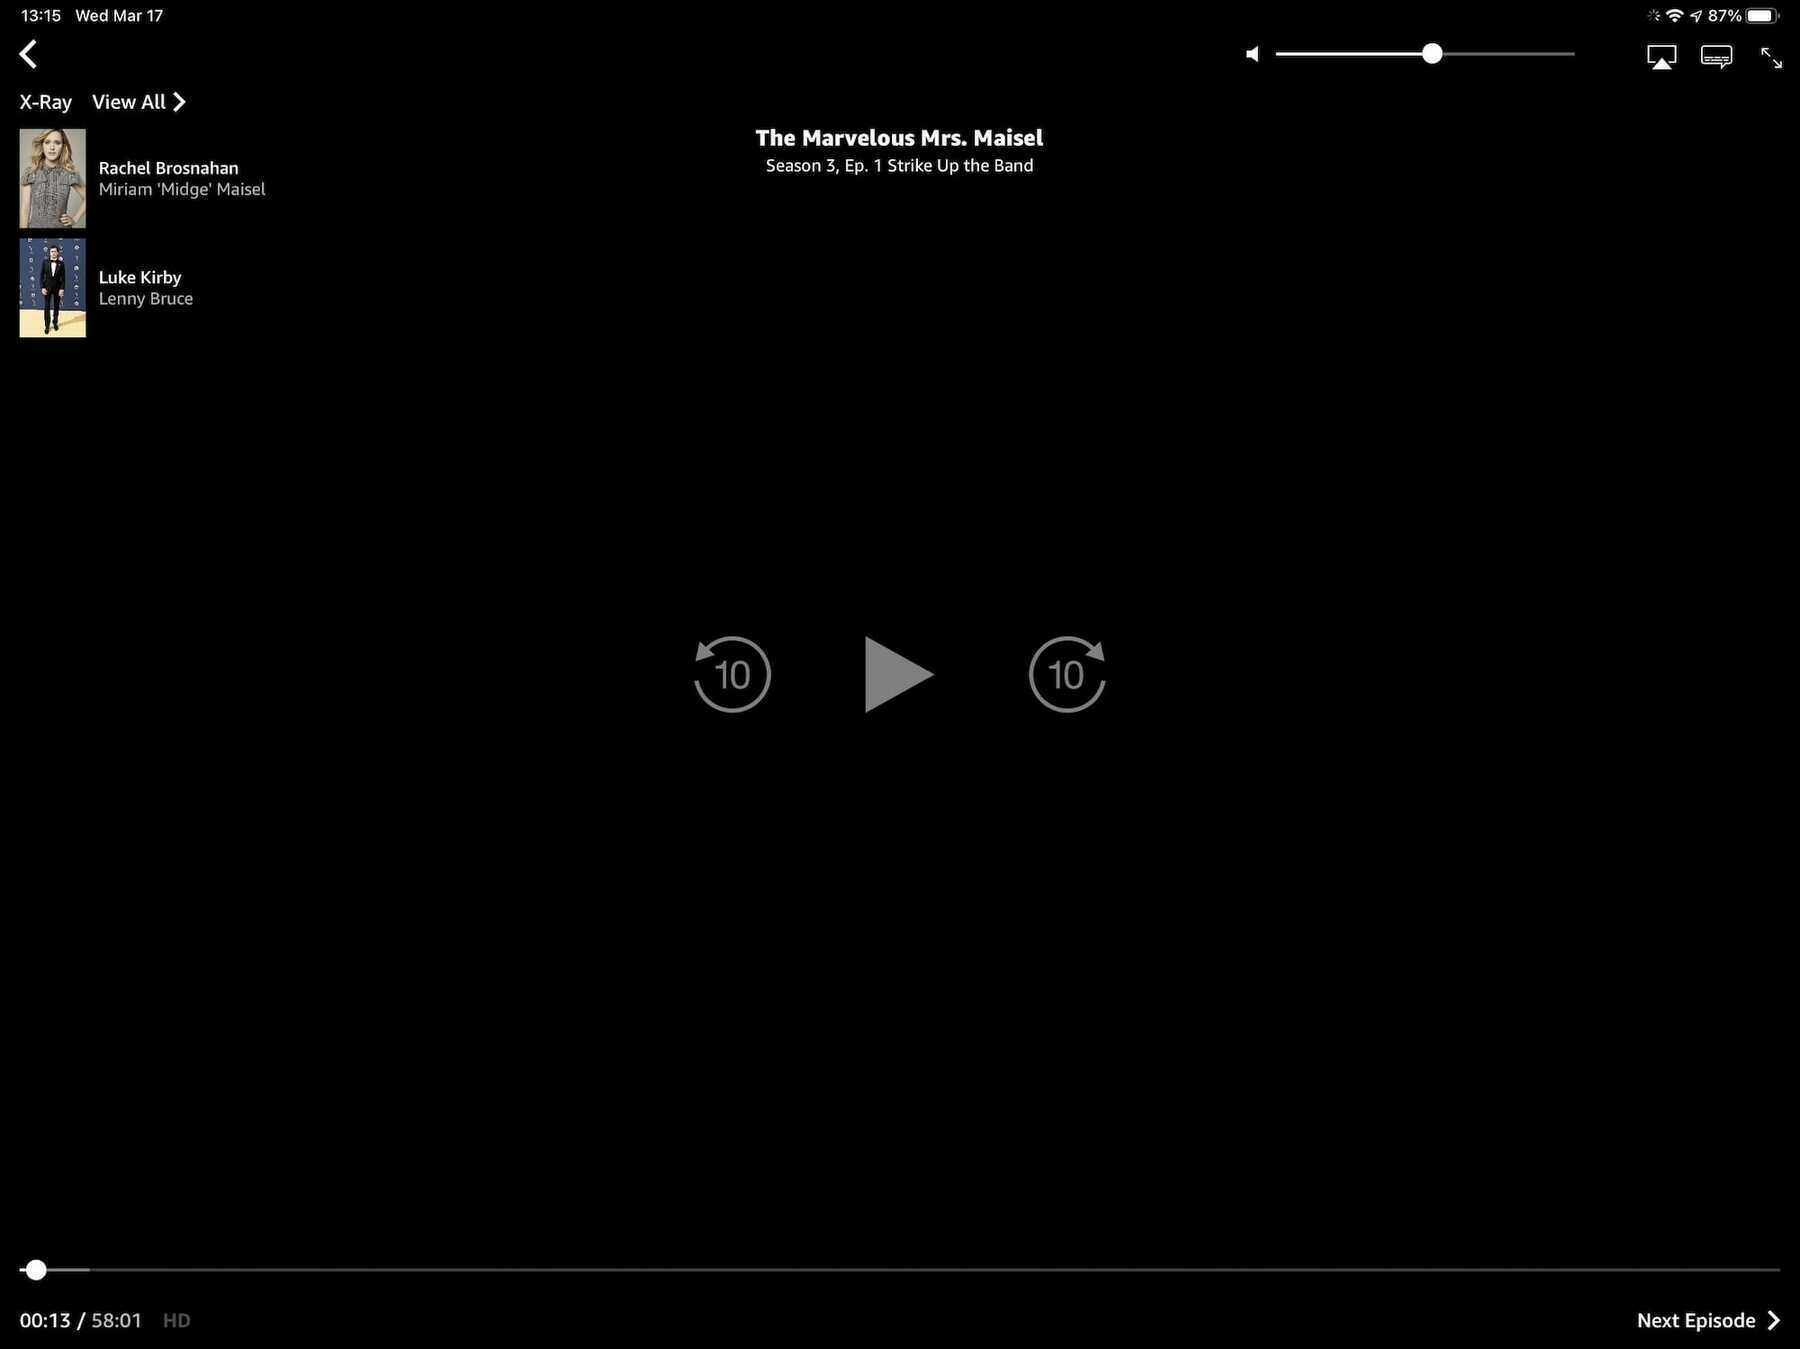 The Prime Video player interface.